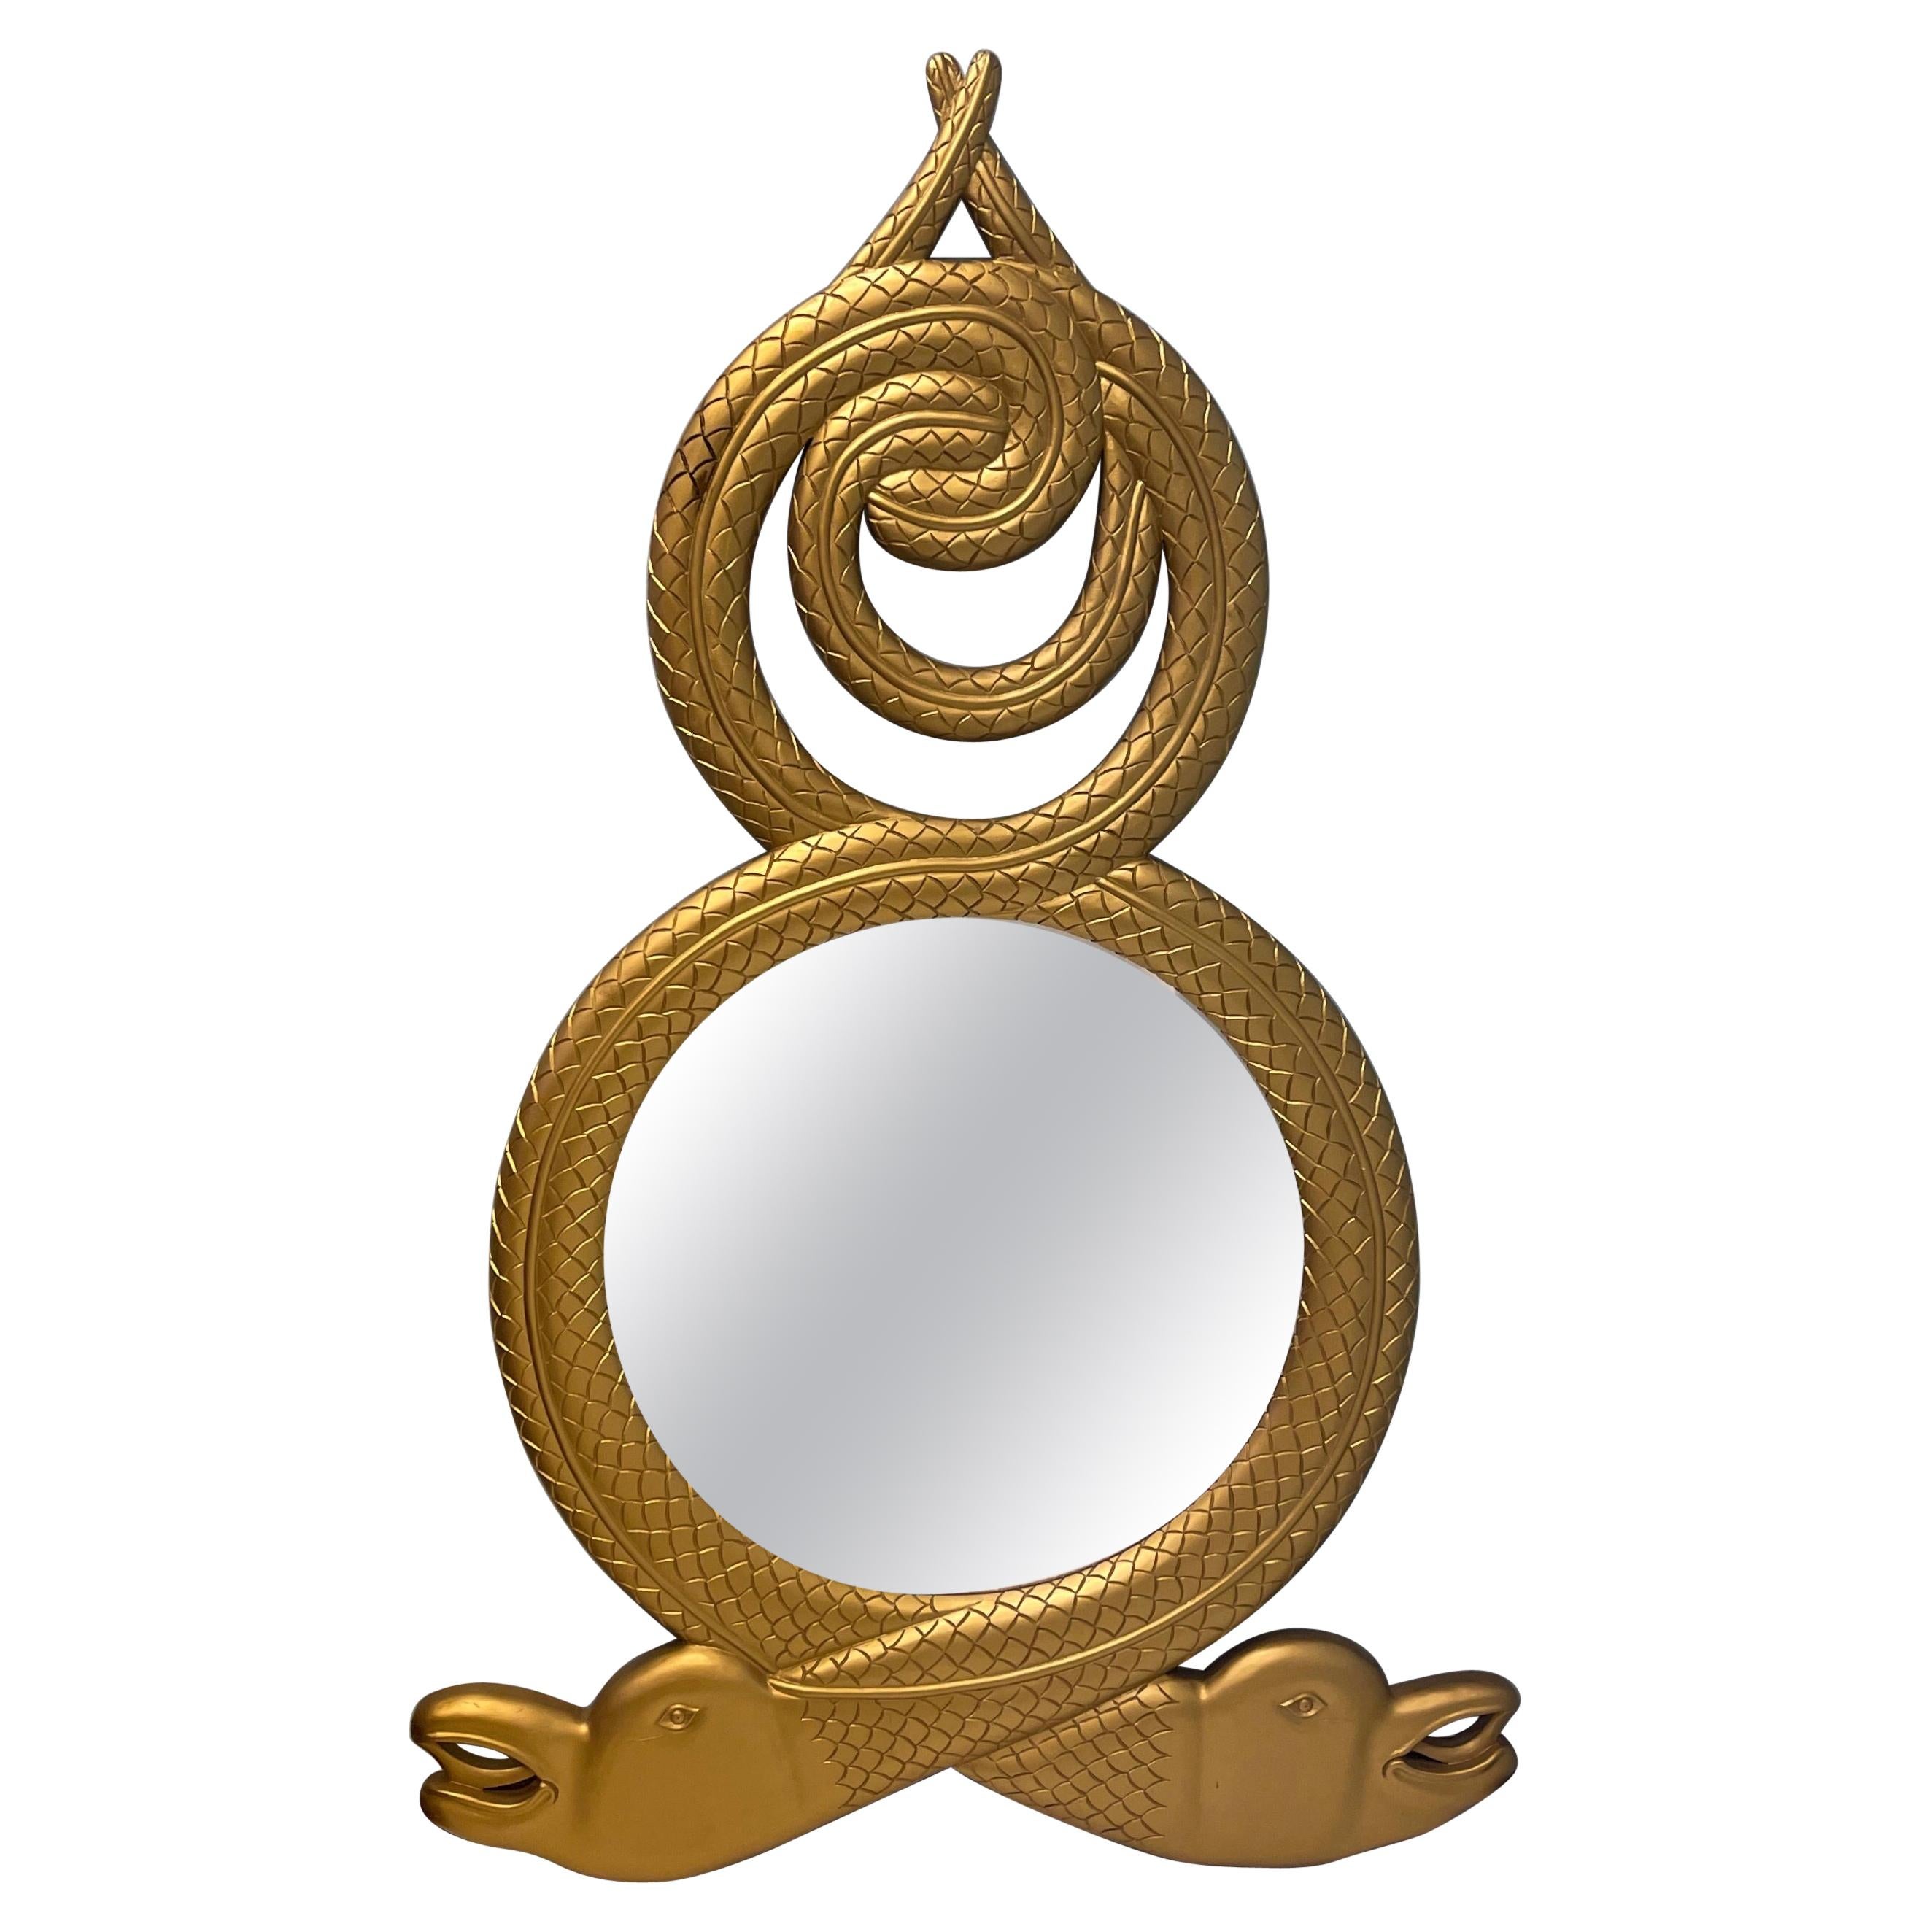 Regency Style Large Scale Giltwood Double Serpent Mirror, Pair Available